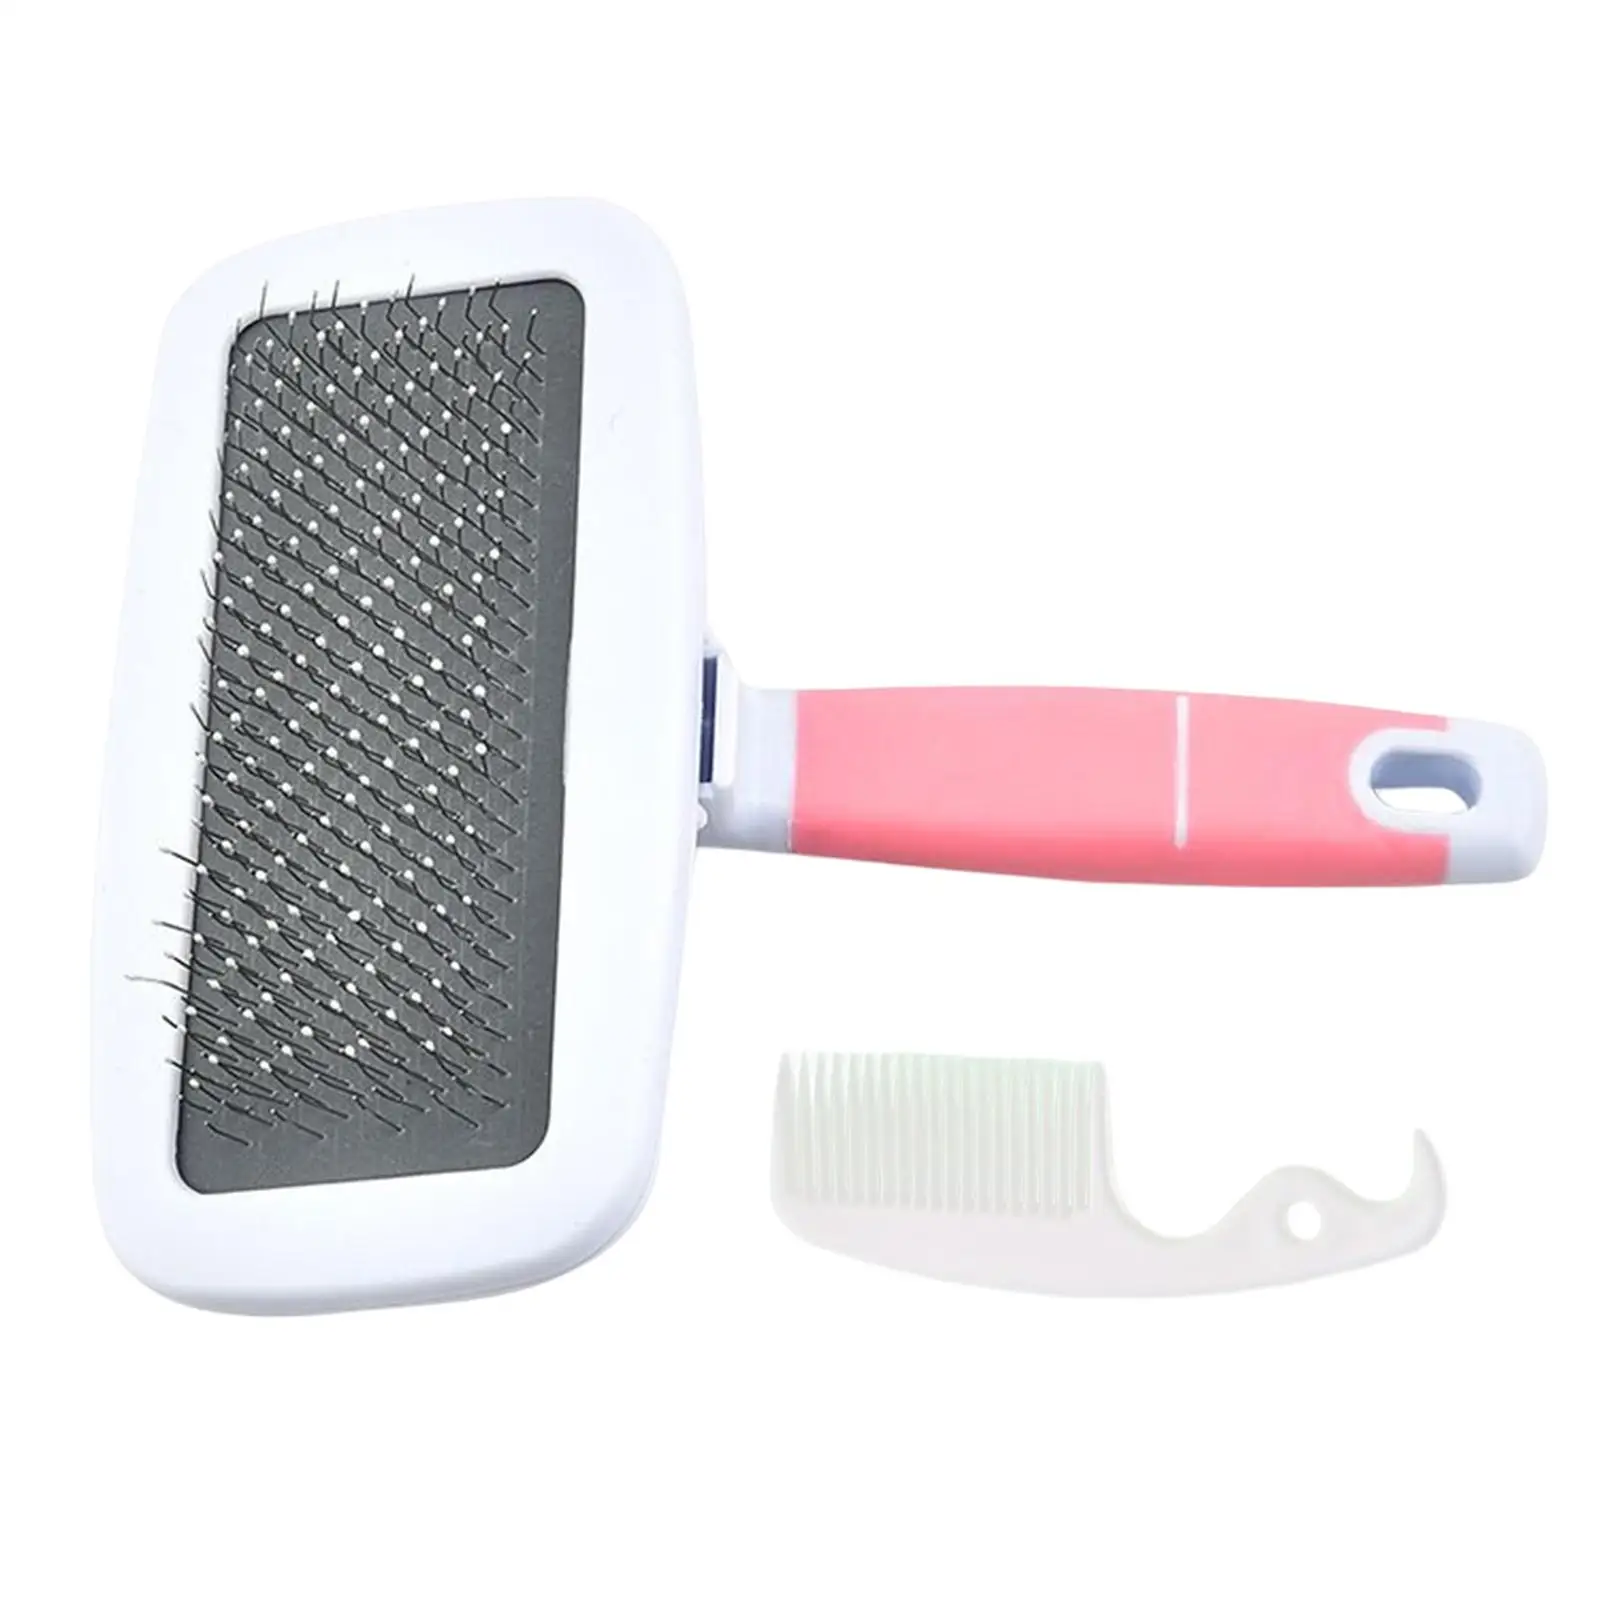 Dog Grooming Brush Stainless Steel Needle Pet Supplies for Small, Medium Large Dogs